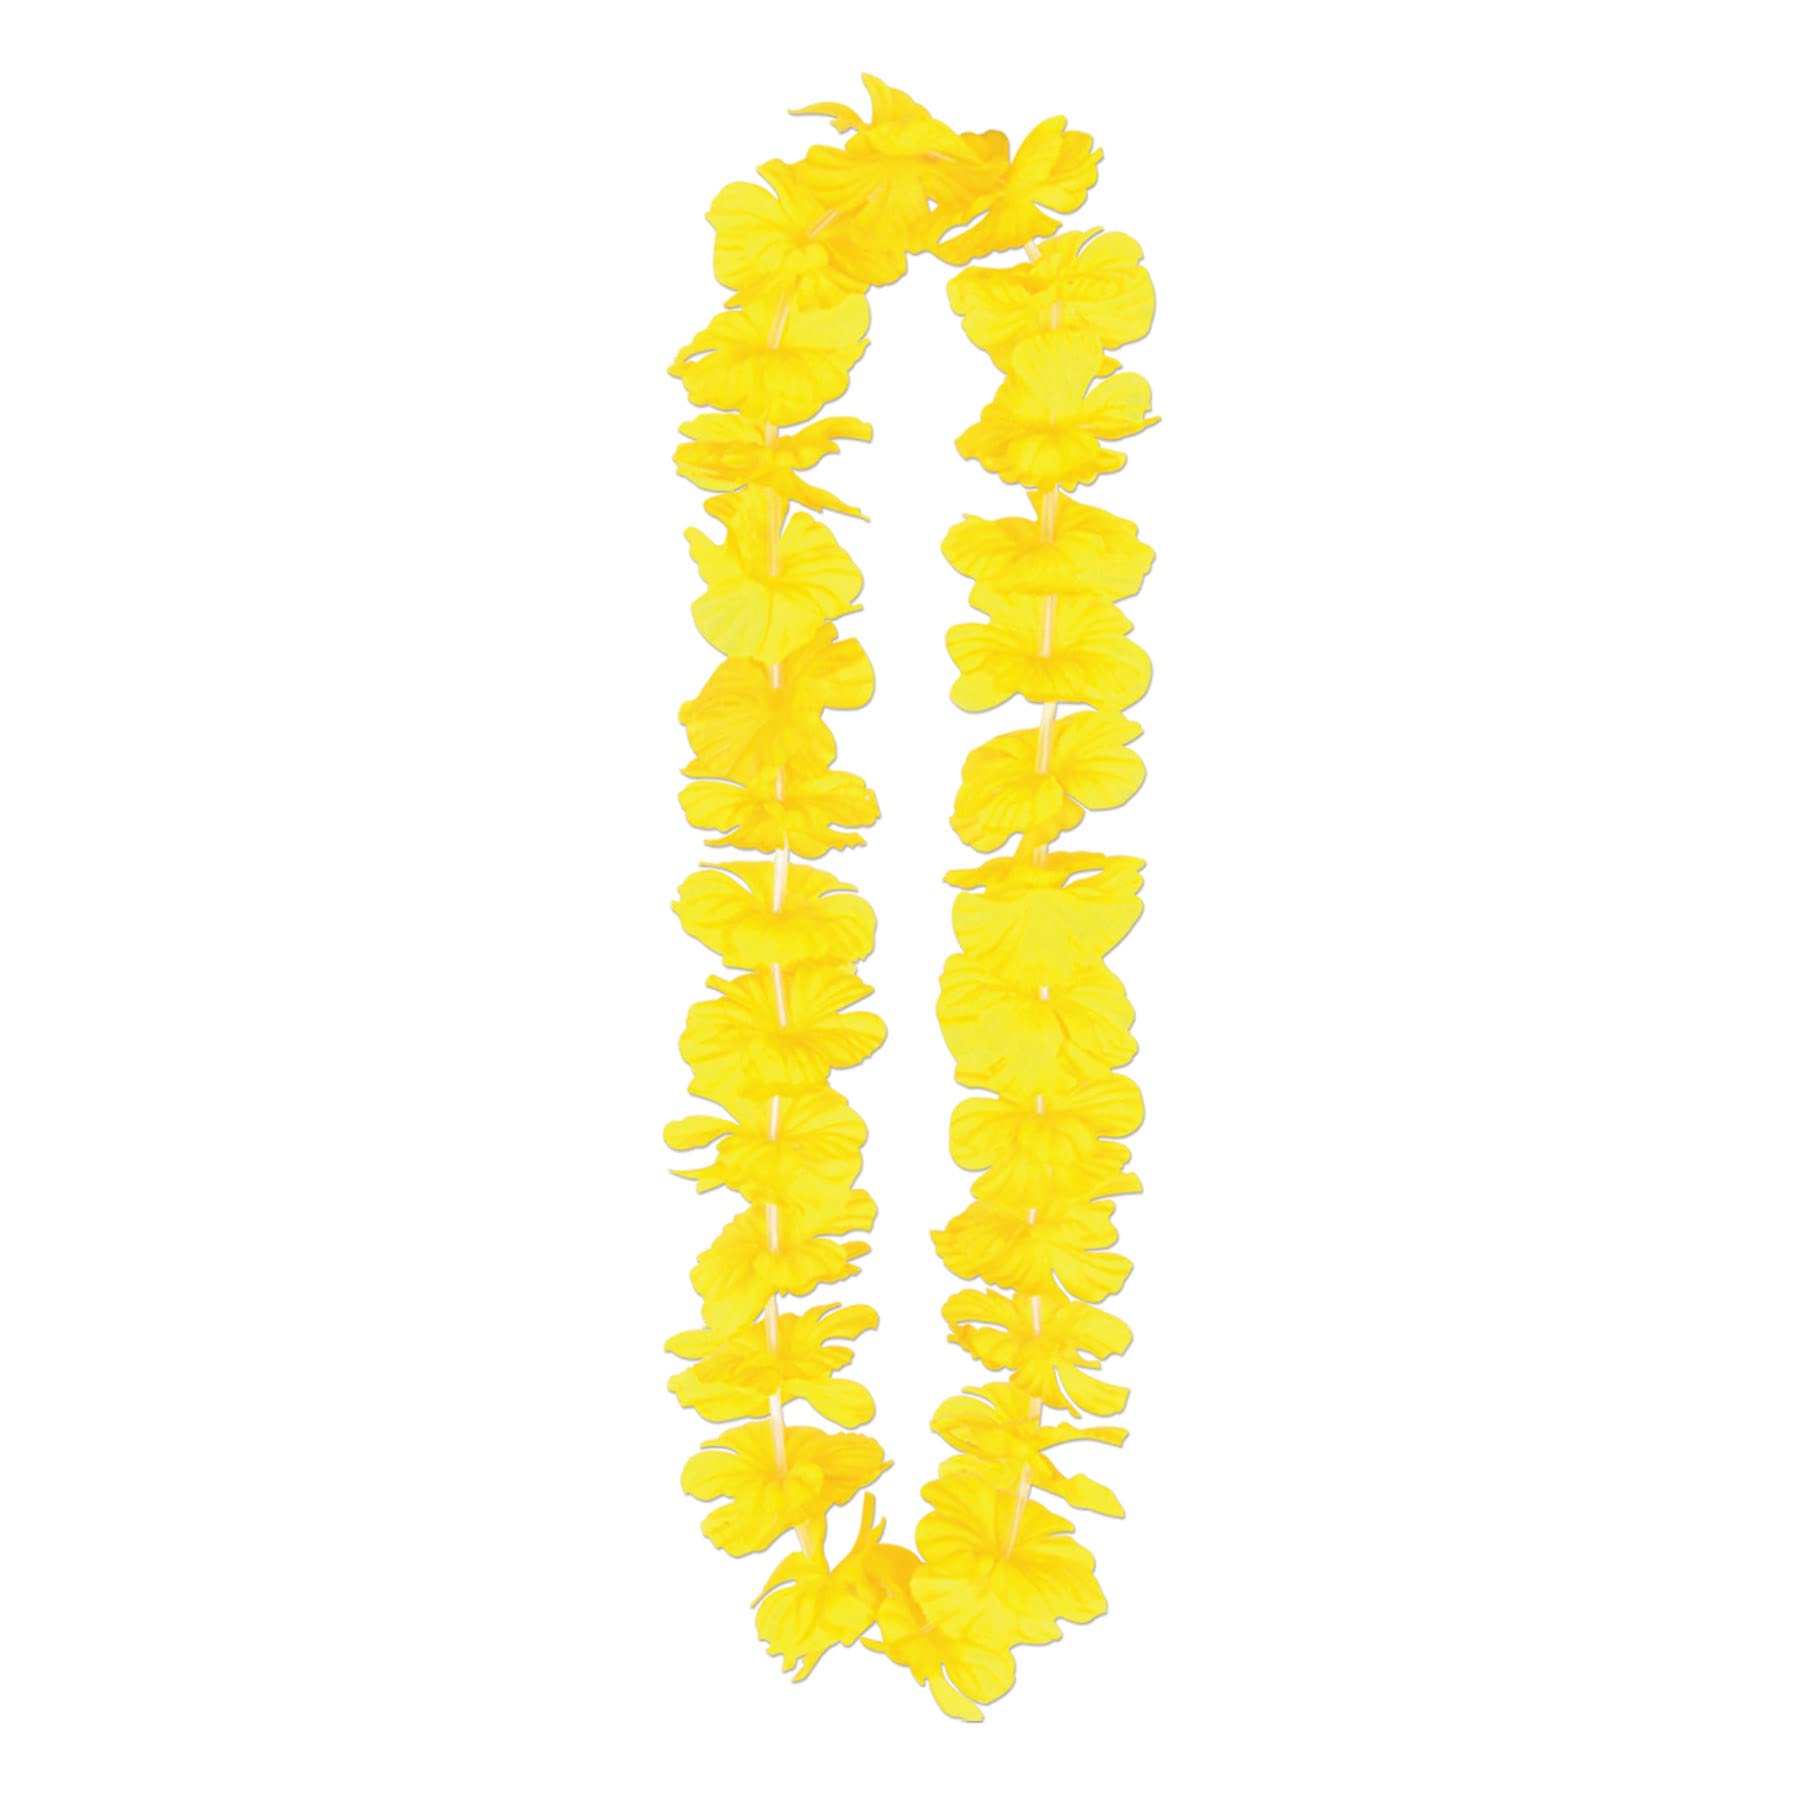 Silk 'N Petals Party Lei (yellow) Party Accessory  (1 count)